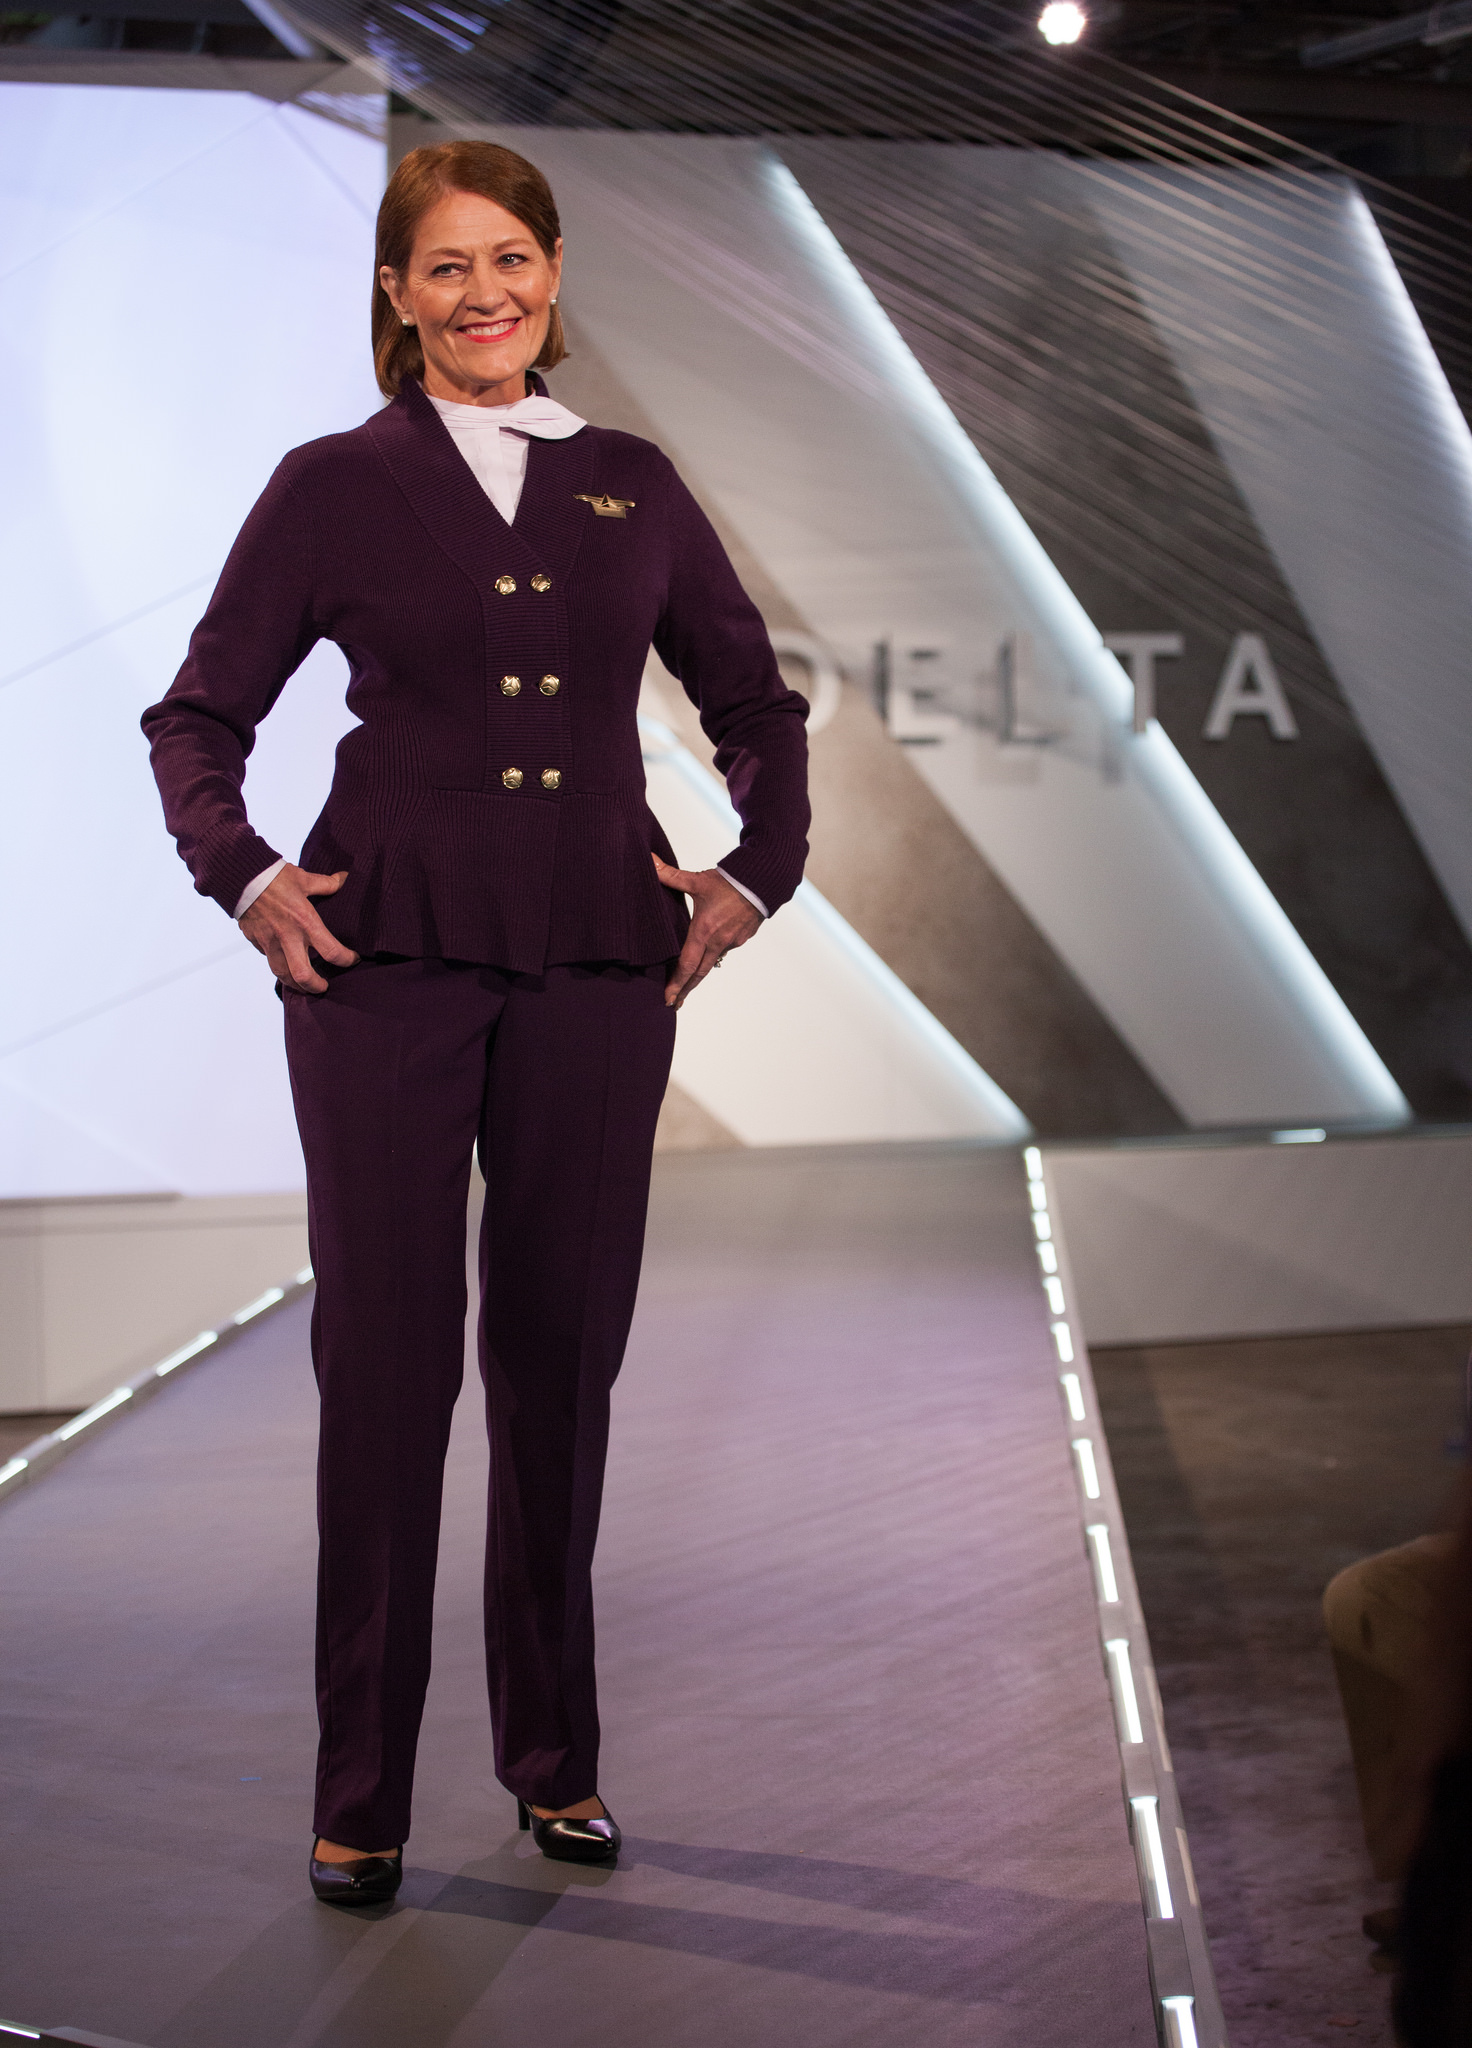 In-flight and airport customer service uniform